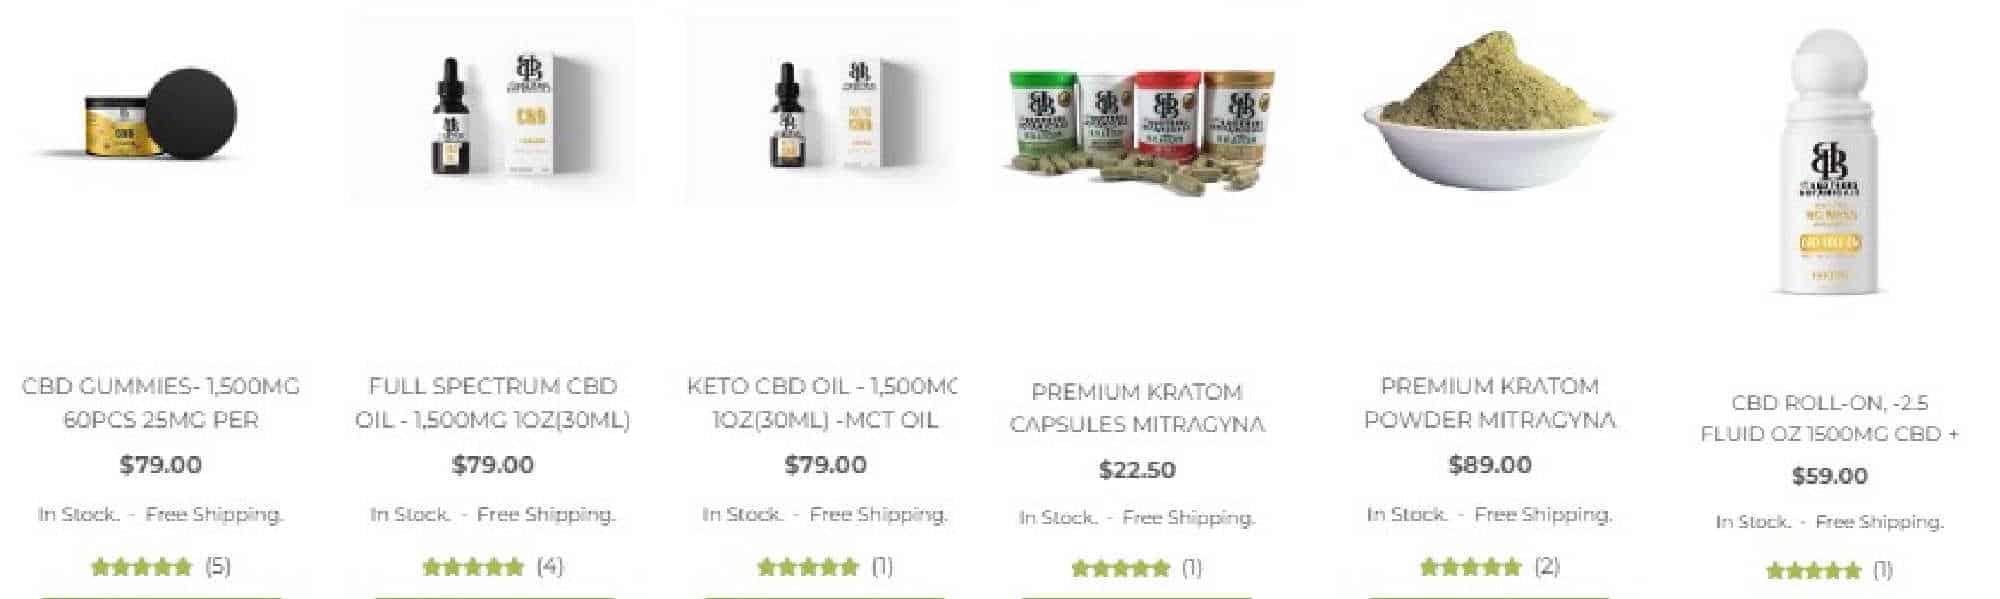 image of brother botanicals products